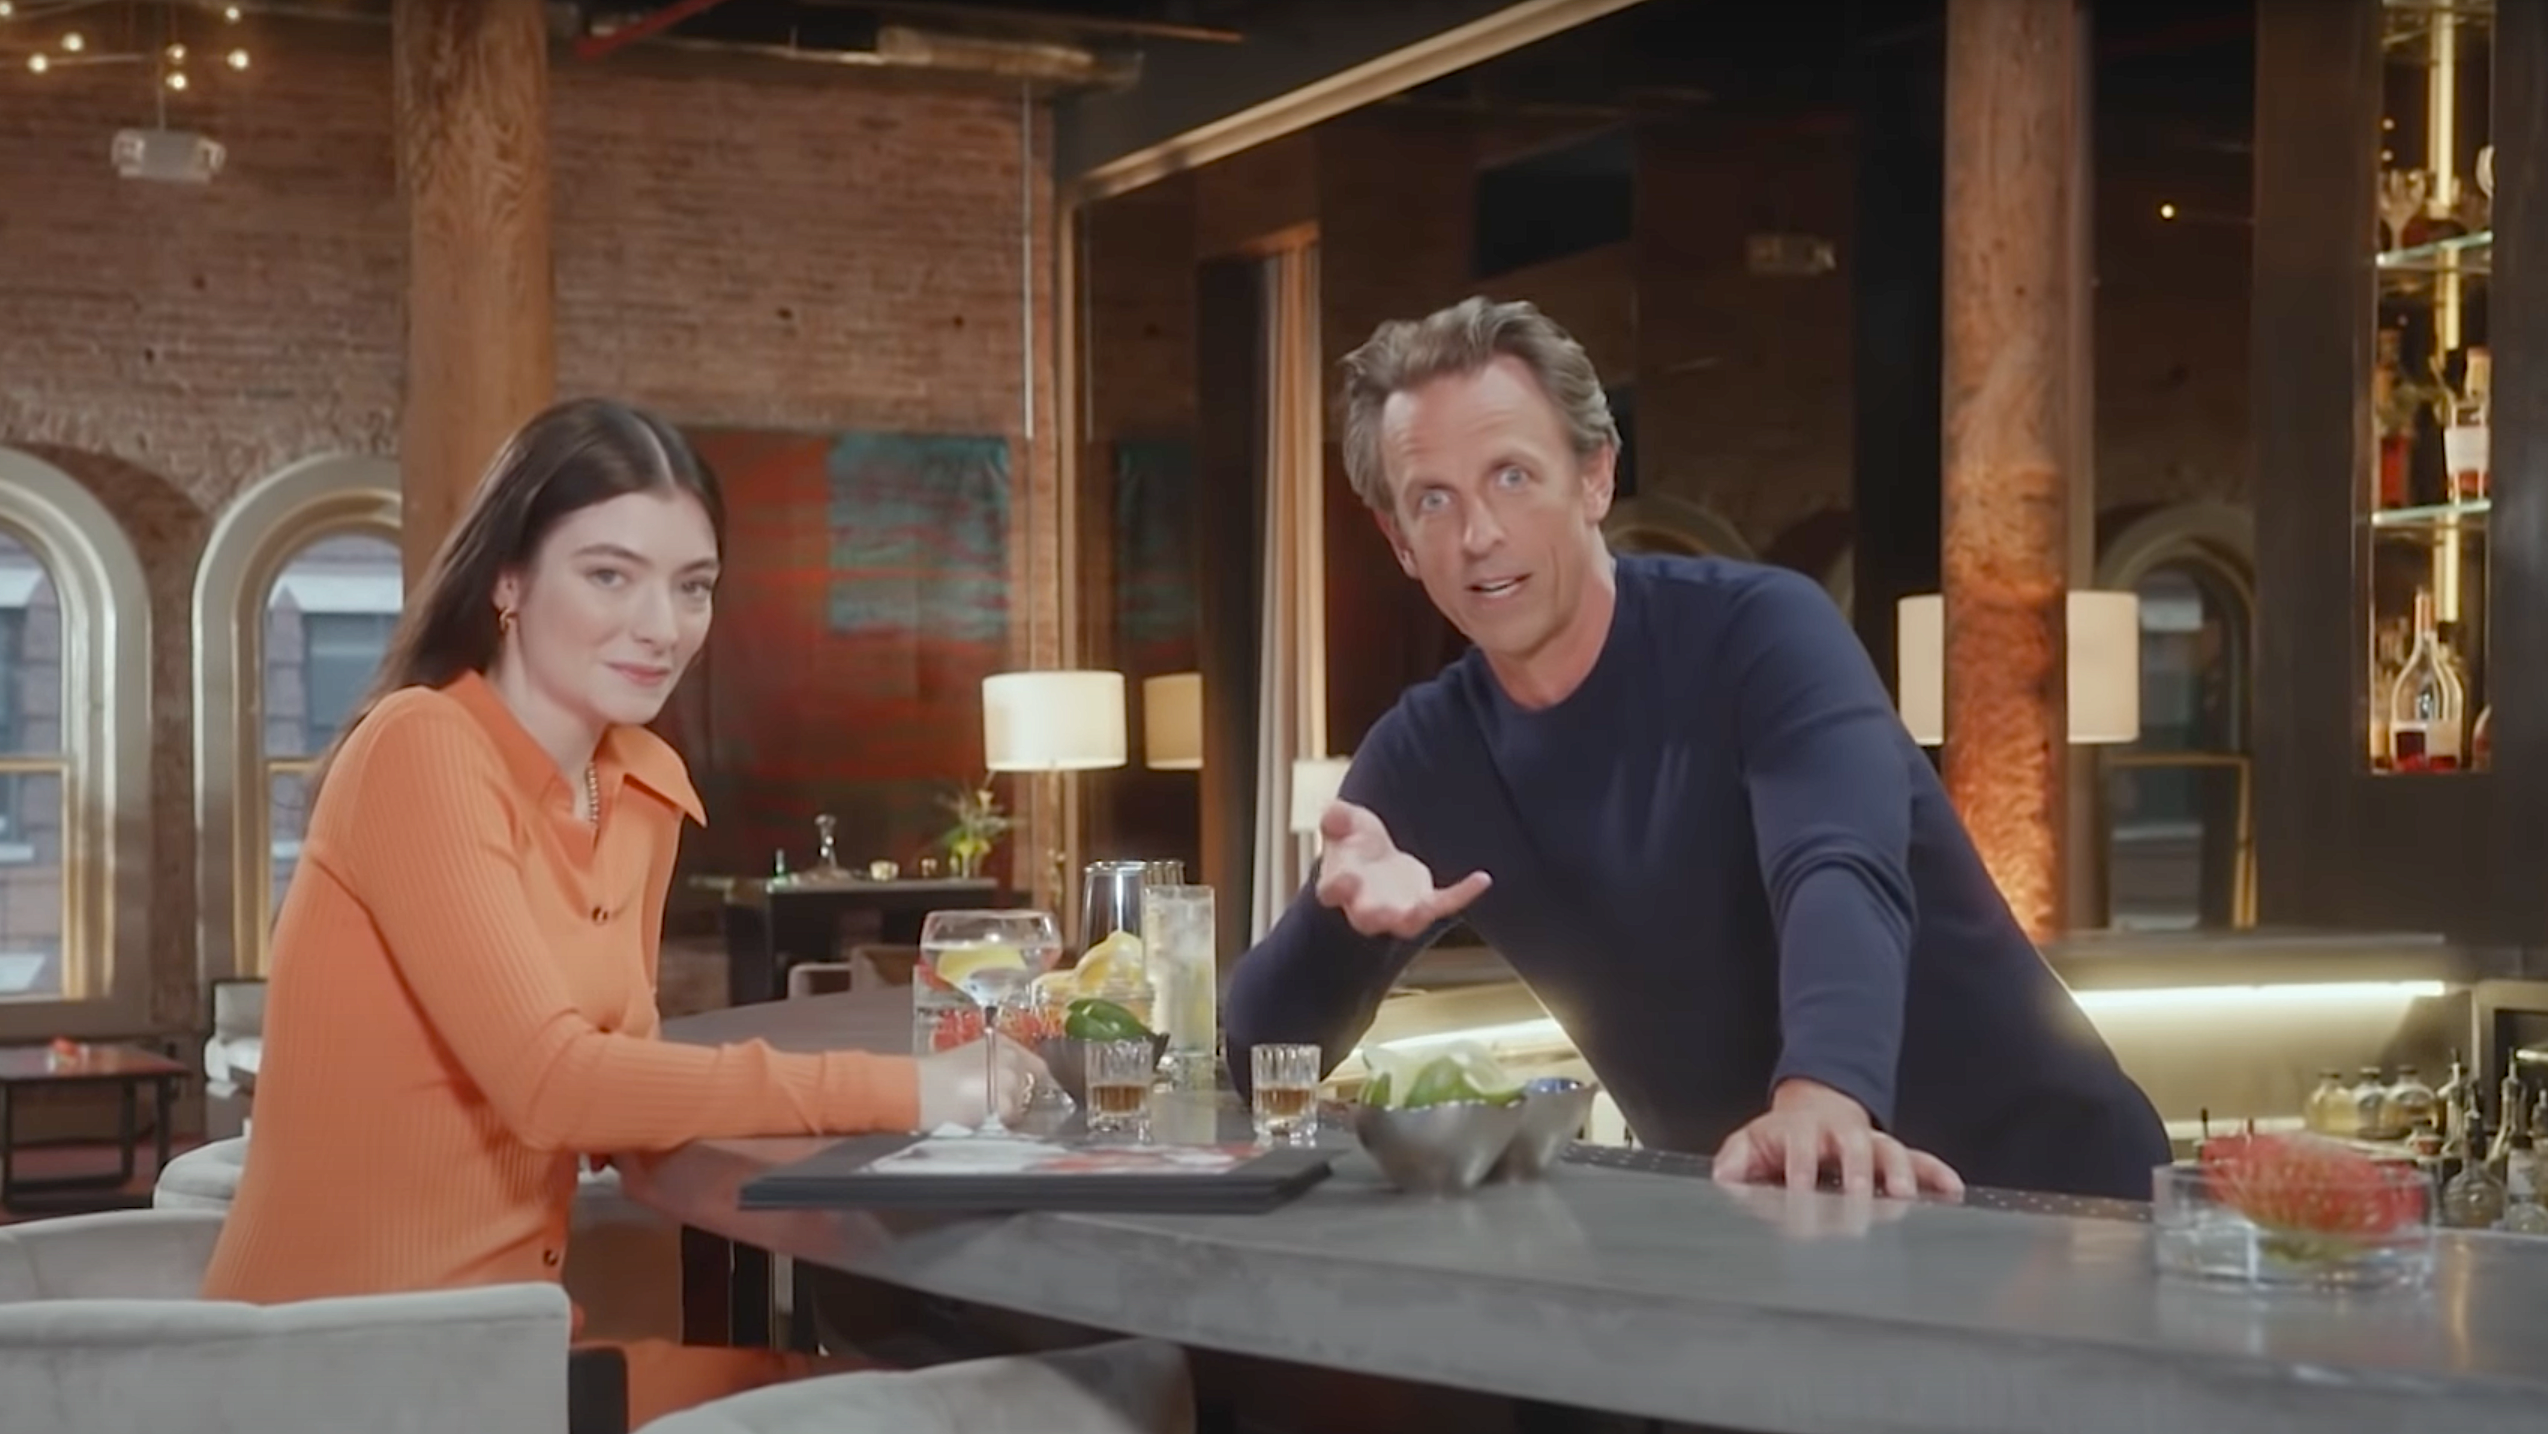 Seth Meyers takes Lorde day drinking, which is good work if you can get it